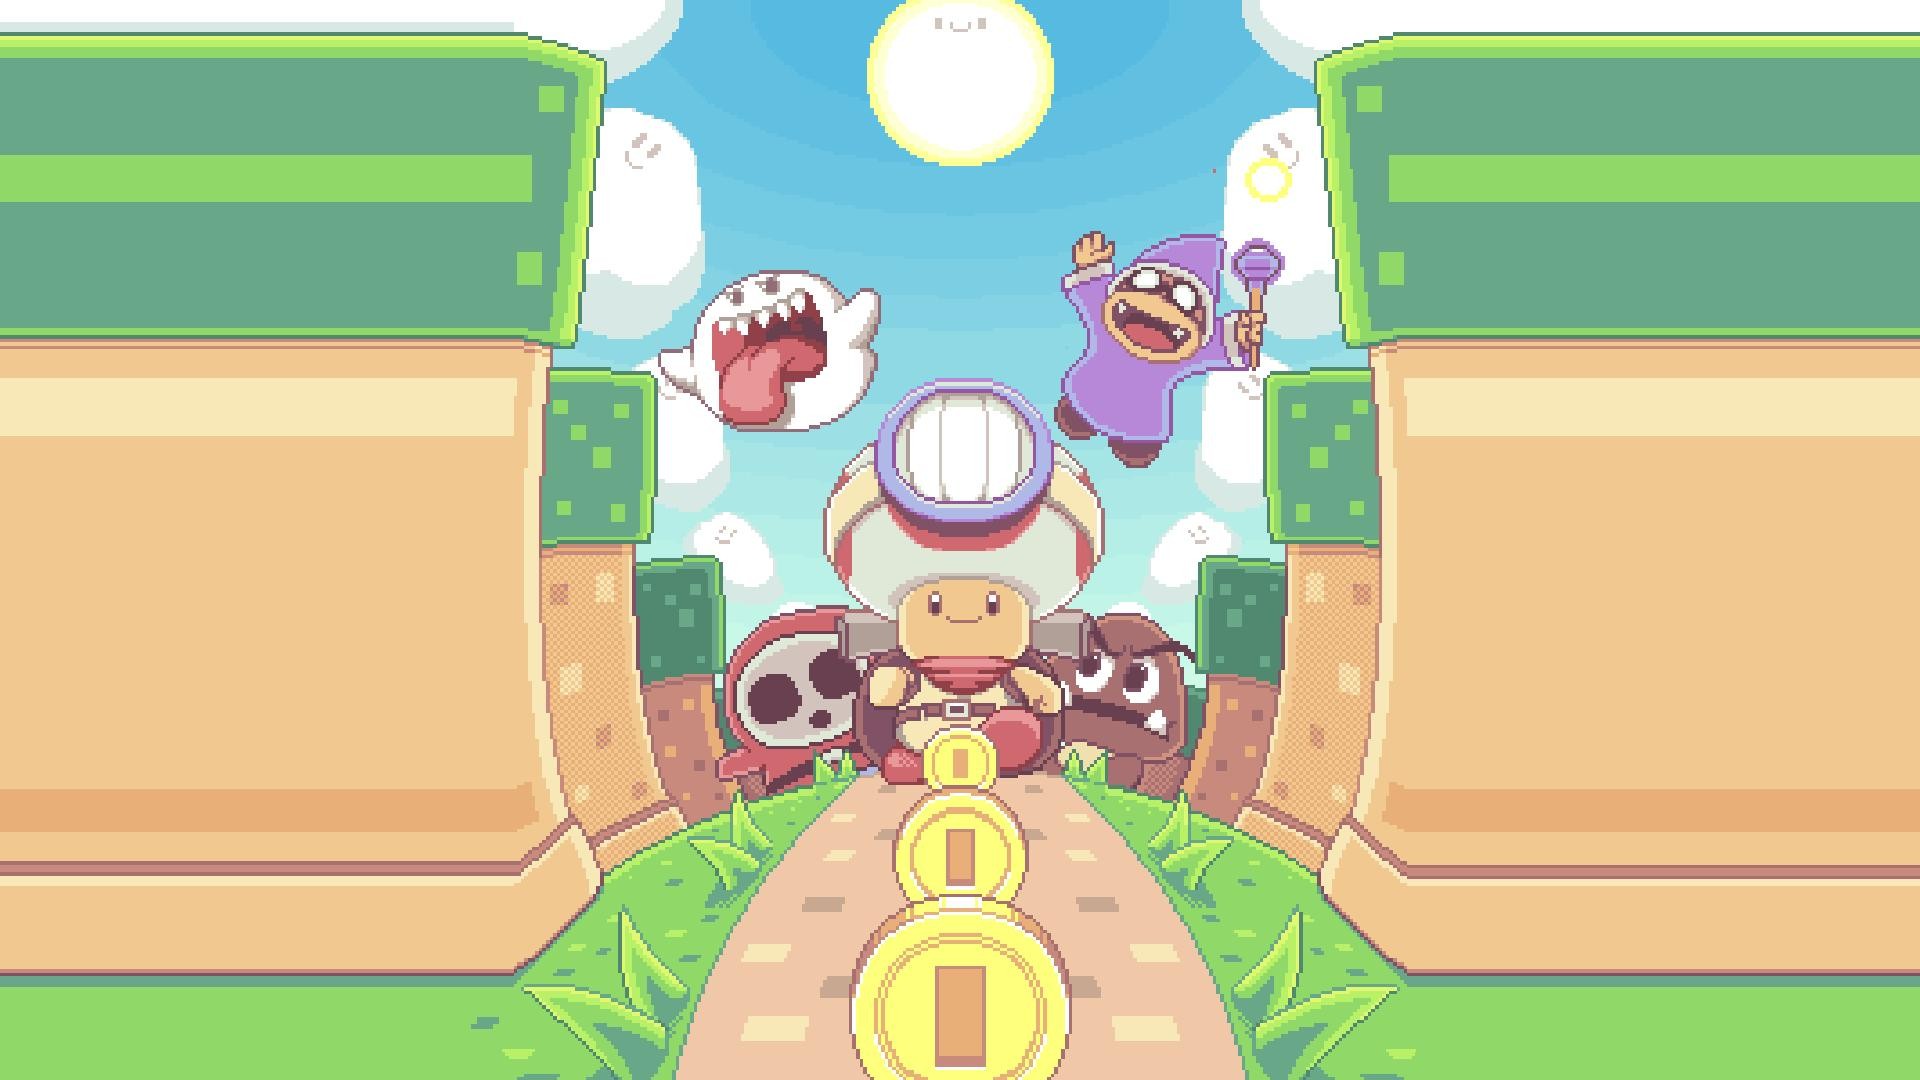 General 1920x1080 money video games ghost Super Mario Toad (character) pixel art pixels clouds Sun grass cobblestone Shy Guy Goomba coins digital art Boo looking at viewer sky path walking pointy teeth